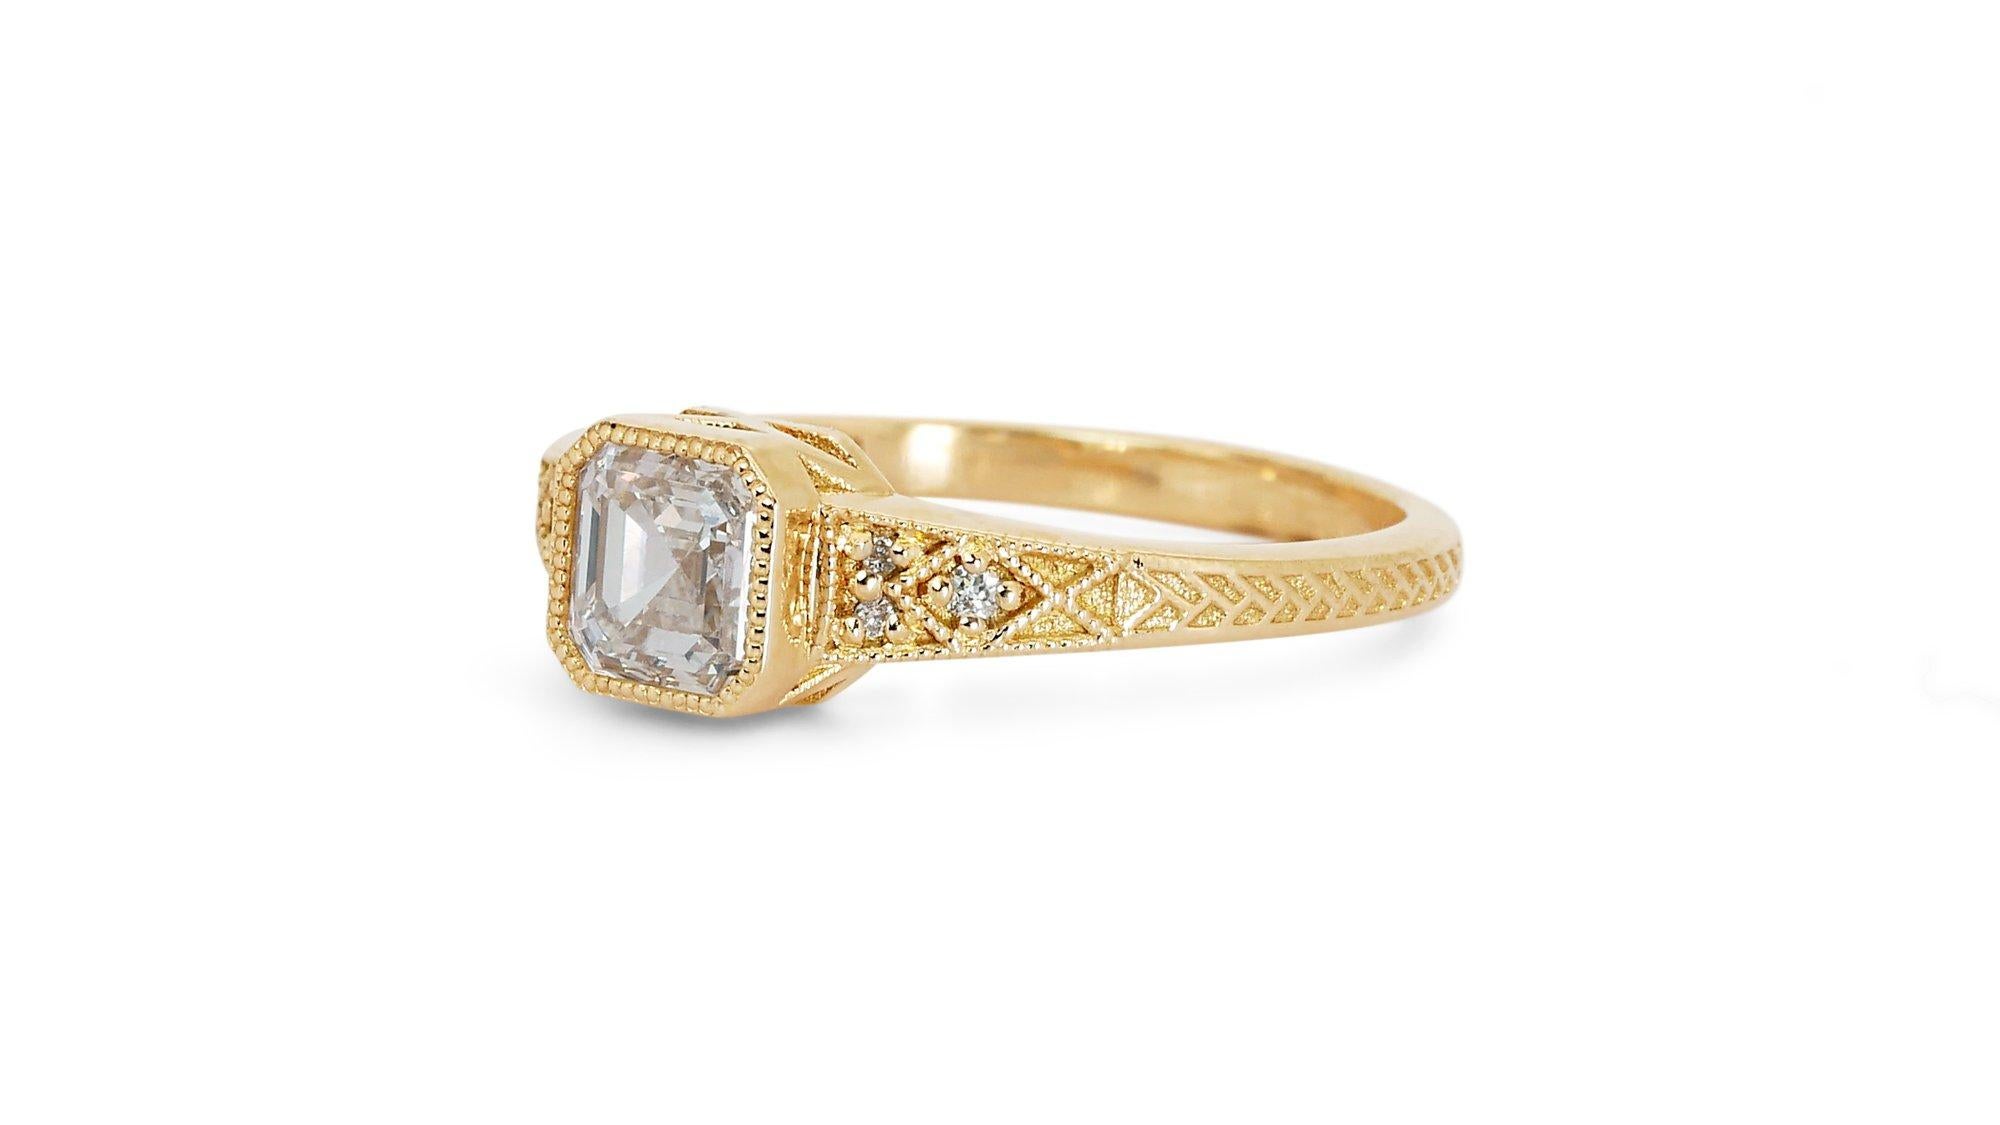 Lustrous 1.04ct Diamond Pave Ring in 18k Yellow Gold - GIA Certified In New Condition For Sale In רמת גן, IL